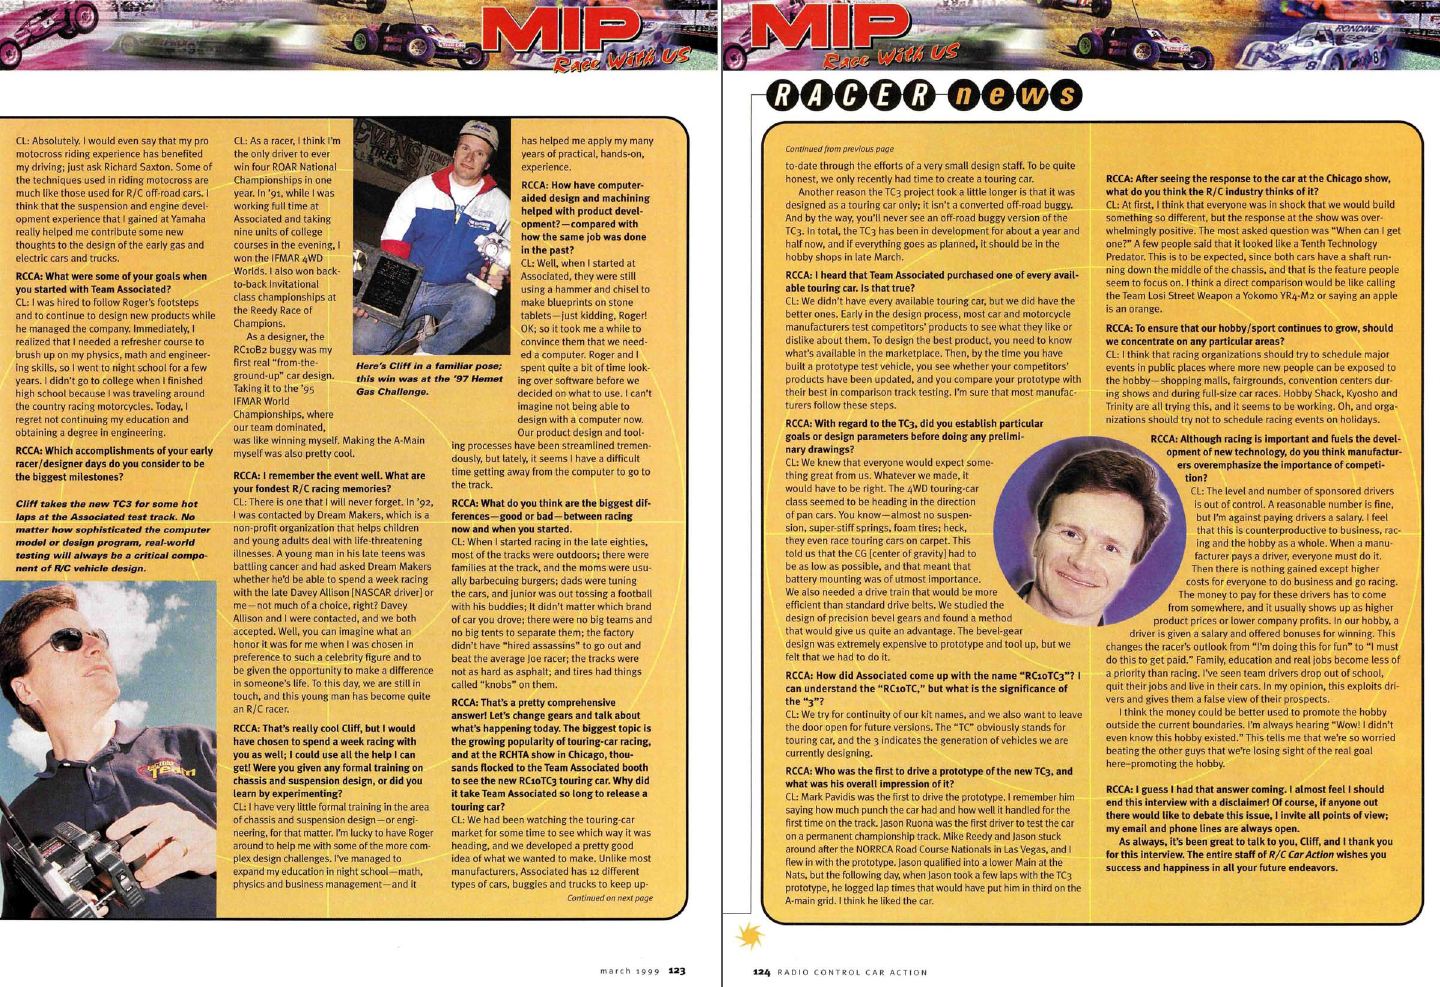 #TBT Cliff Notes interview In November 1991 Issue